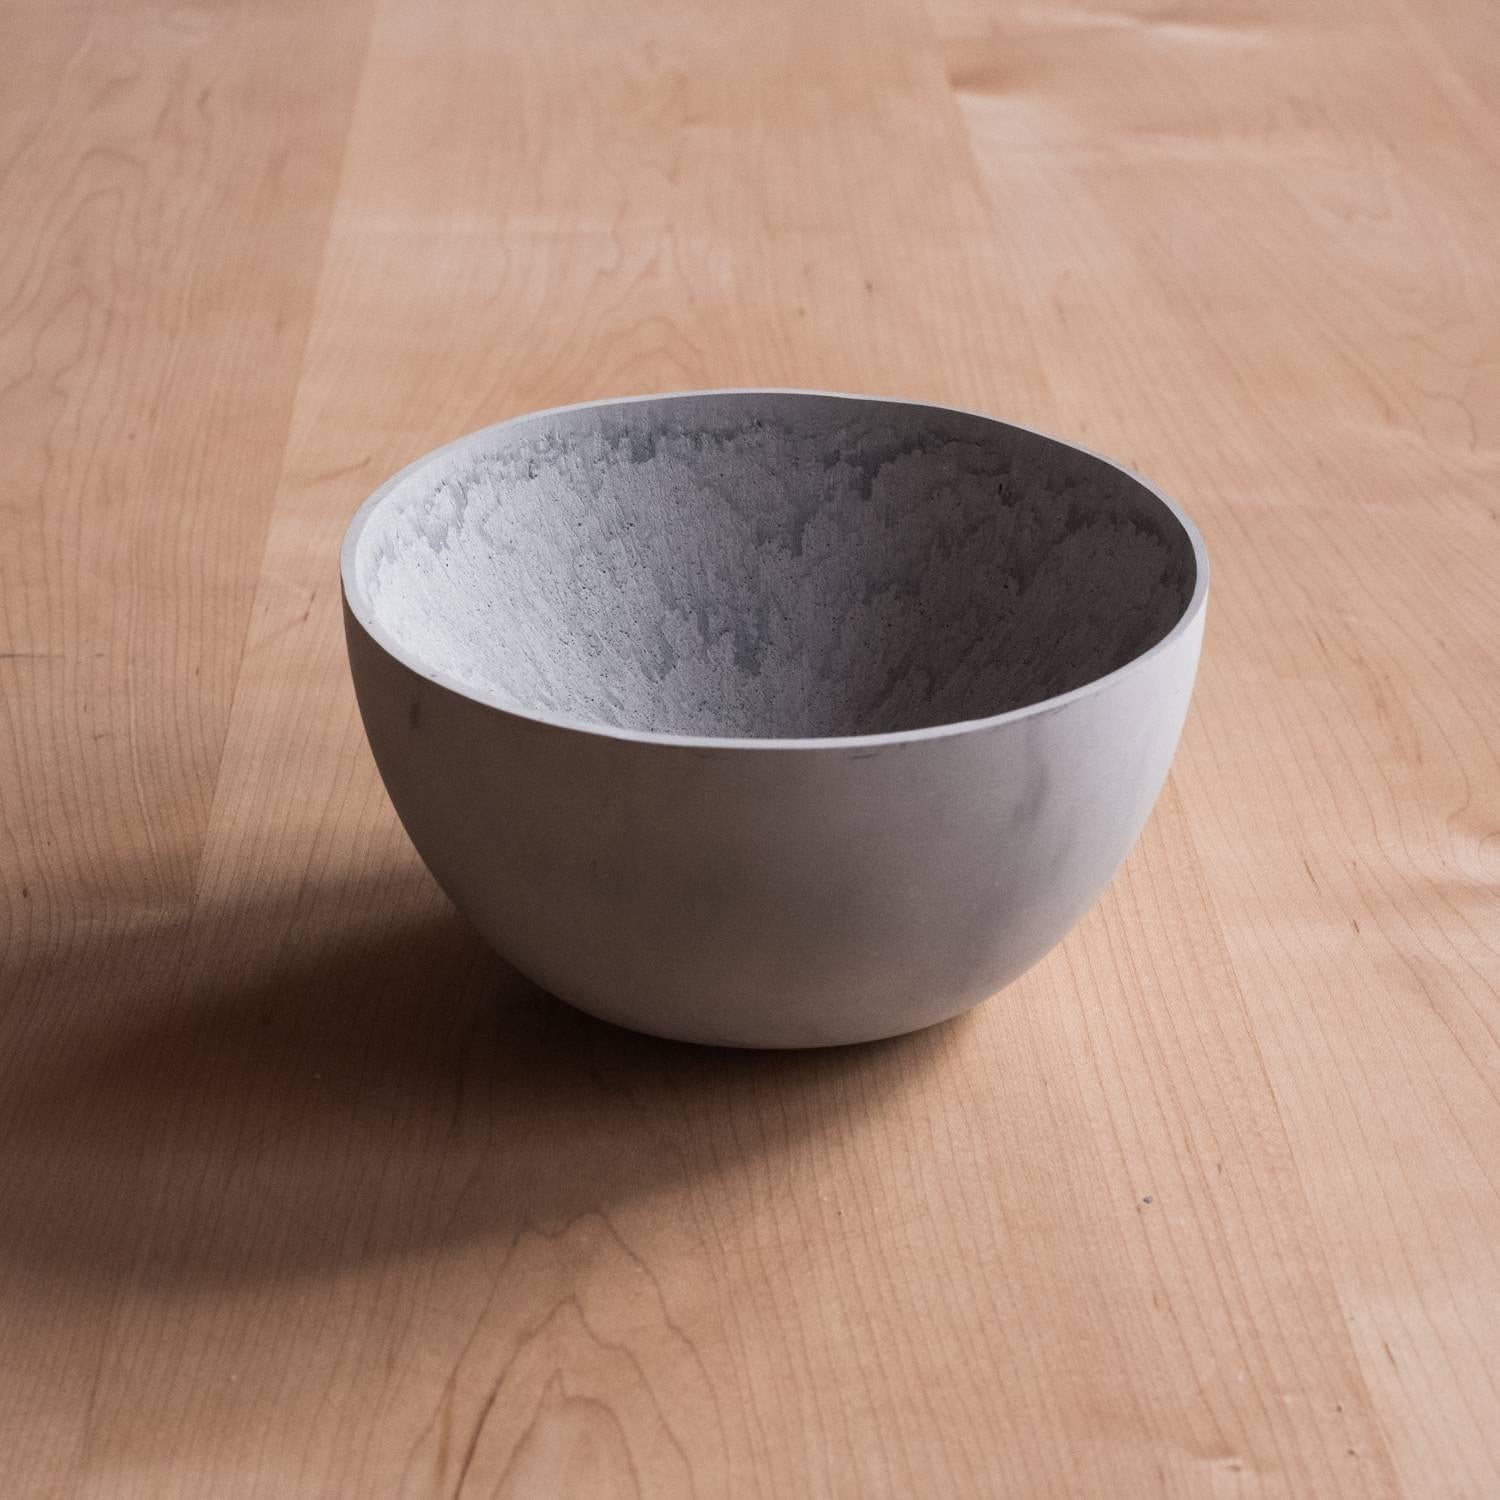 A collection of 236 unique bowls, the Concrete Series by UMÉ Studio expresses the tension between heavy concrete and its delicate edge generated by hand pouring. While one assumes concrete should be strong and durable, it is, at its core, fragile.